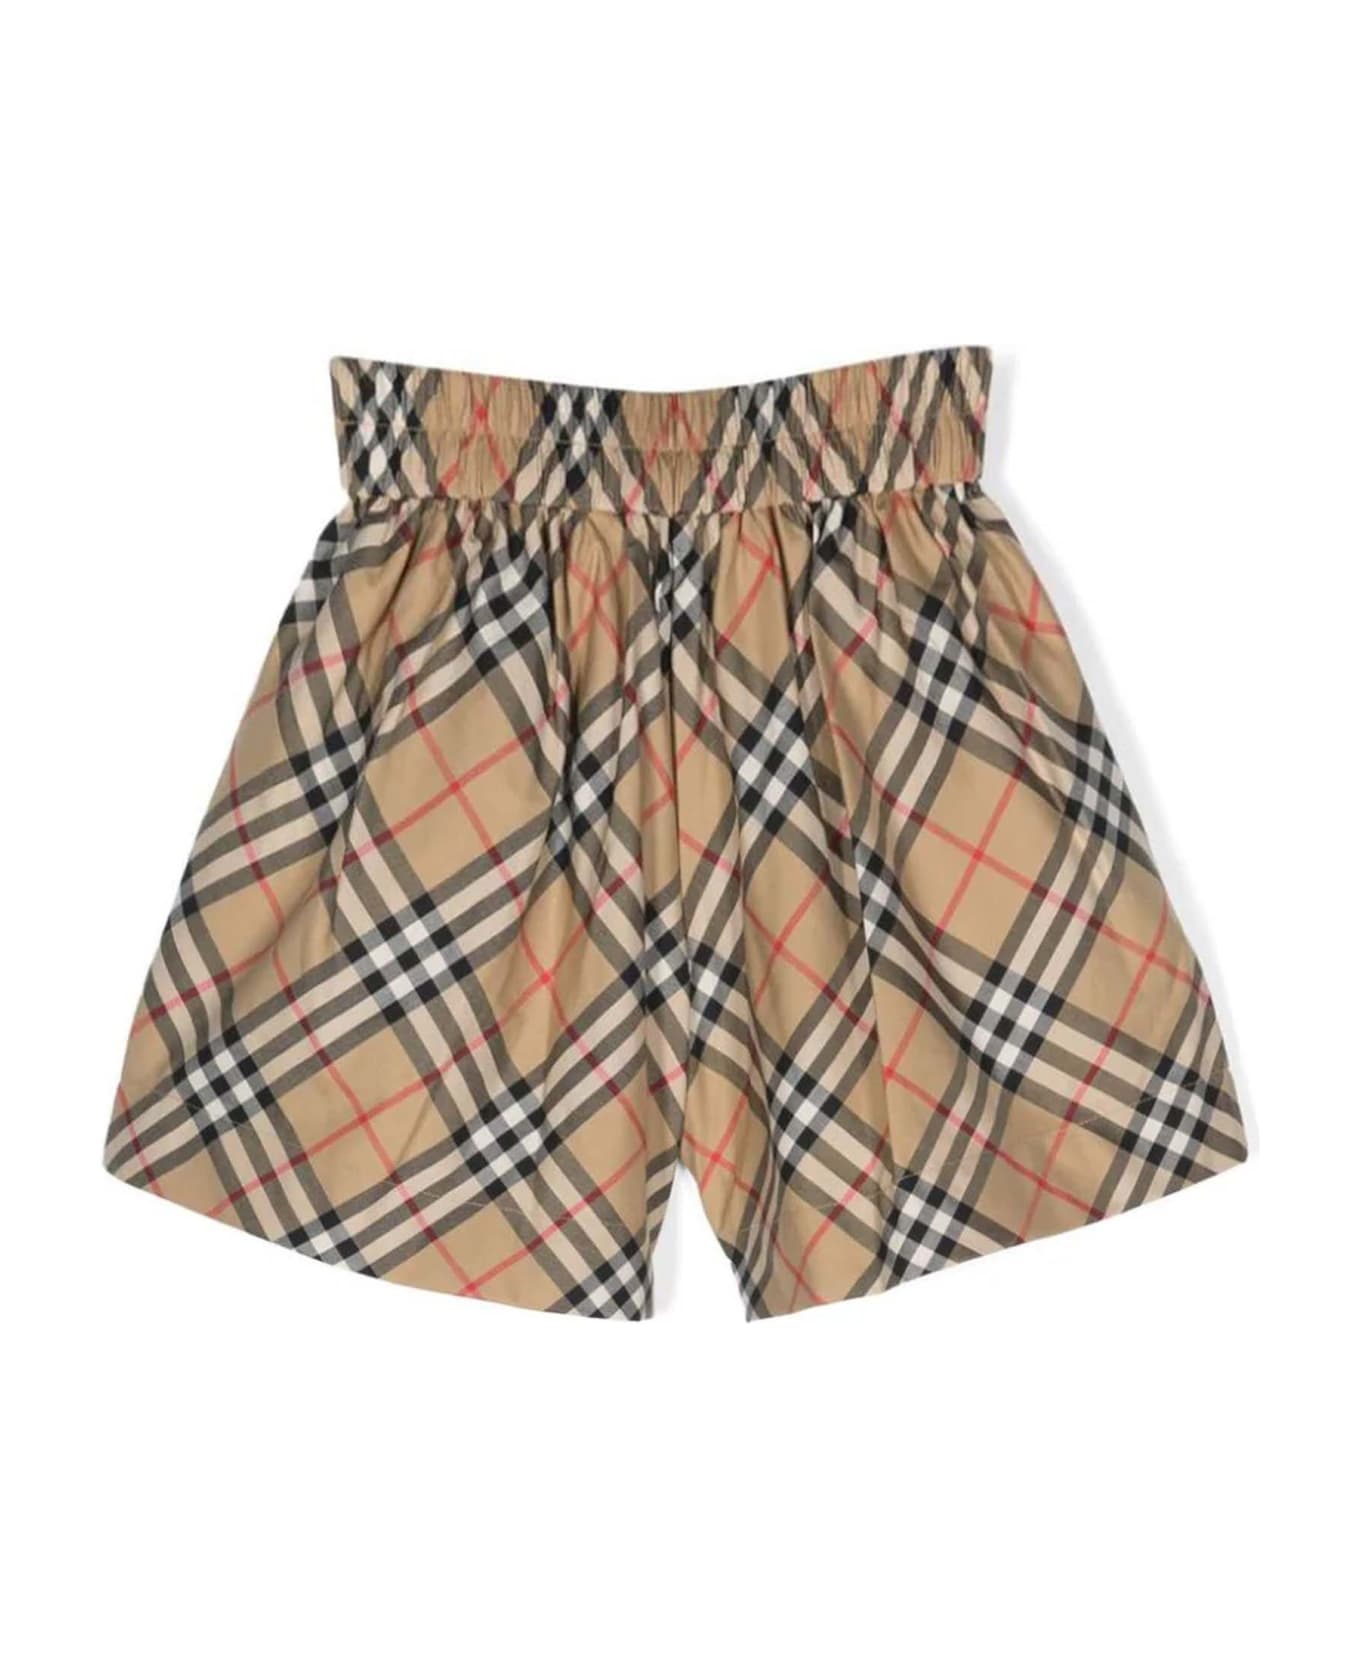 Burberry Vintage Check-pattern Cotton Shorts - Archive Beige Ip Check